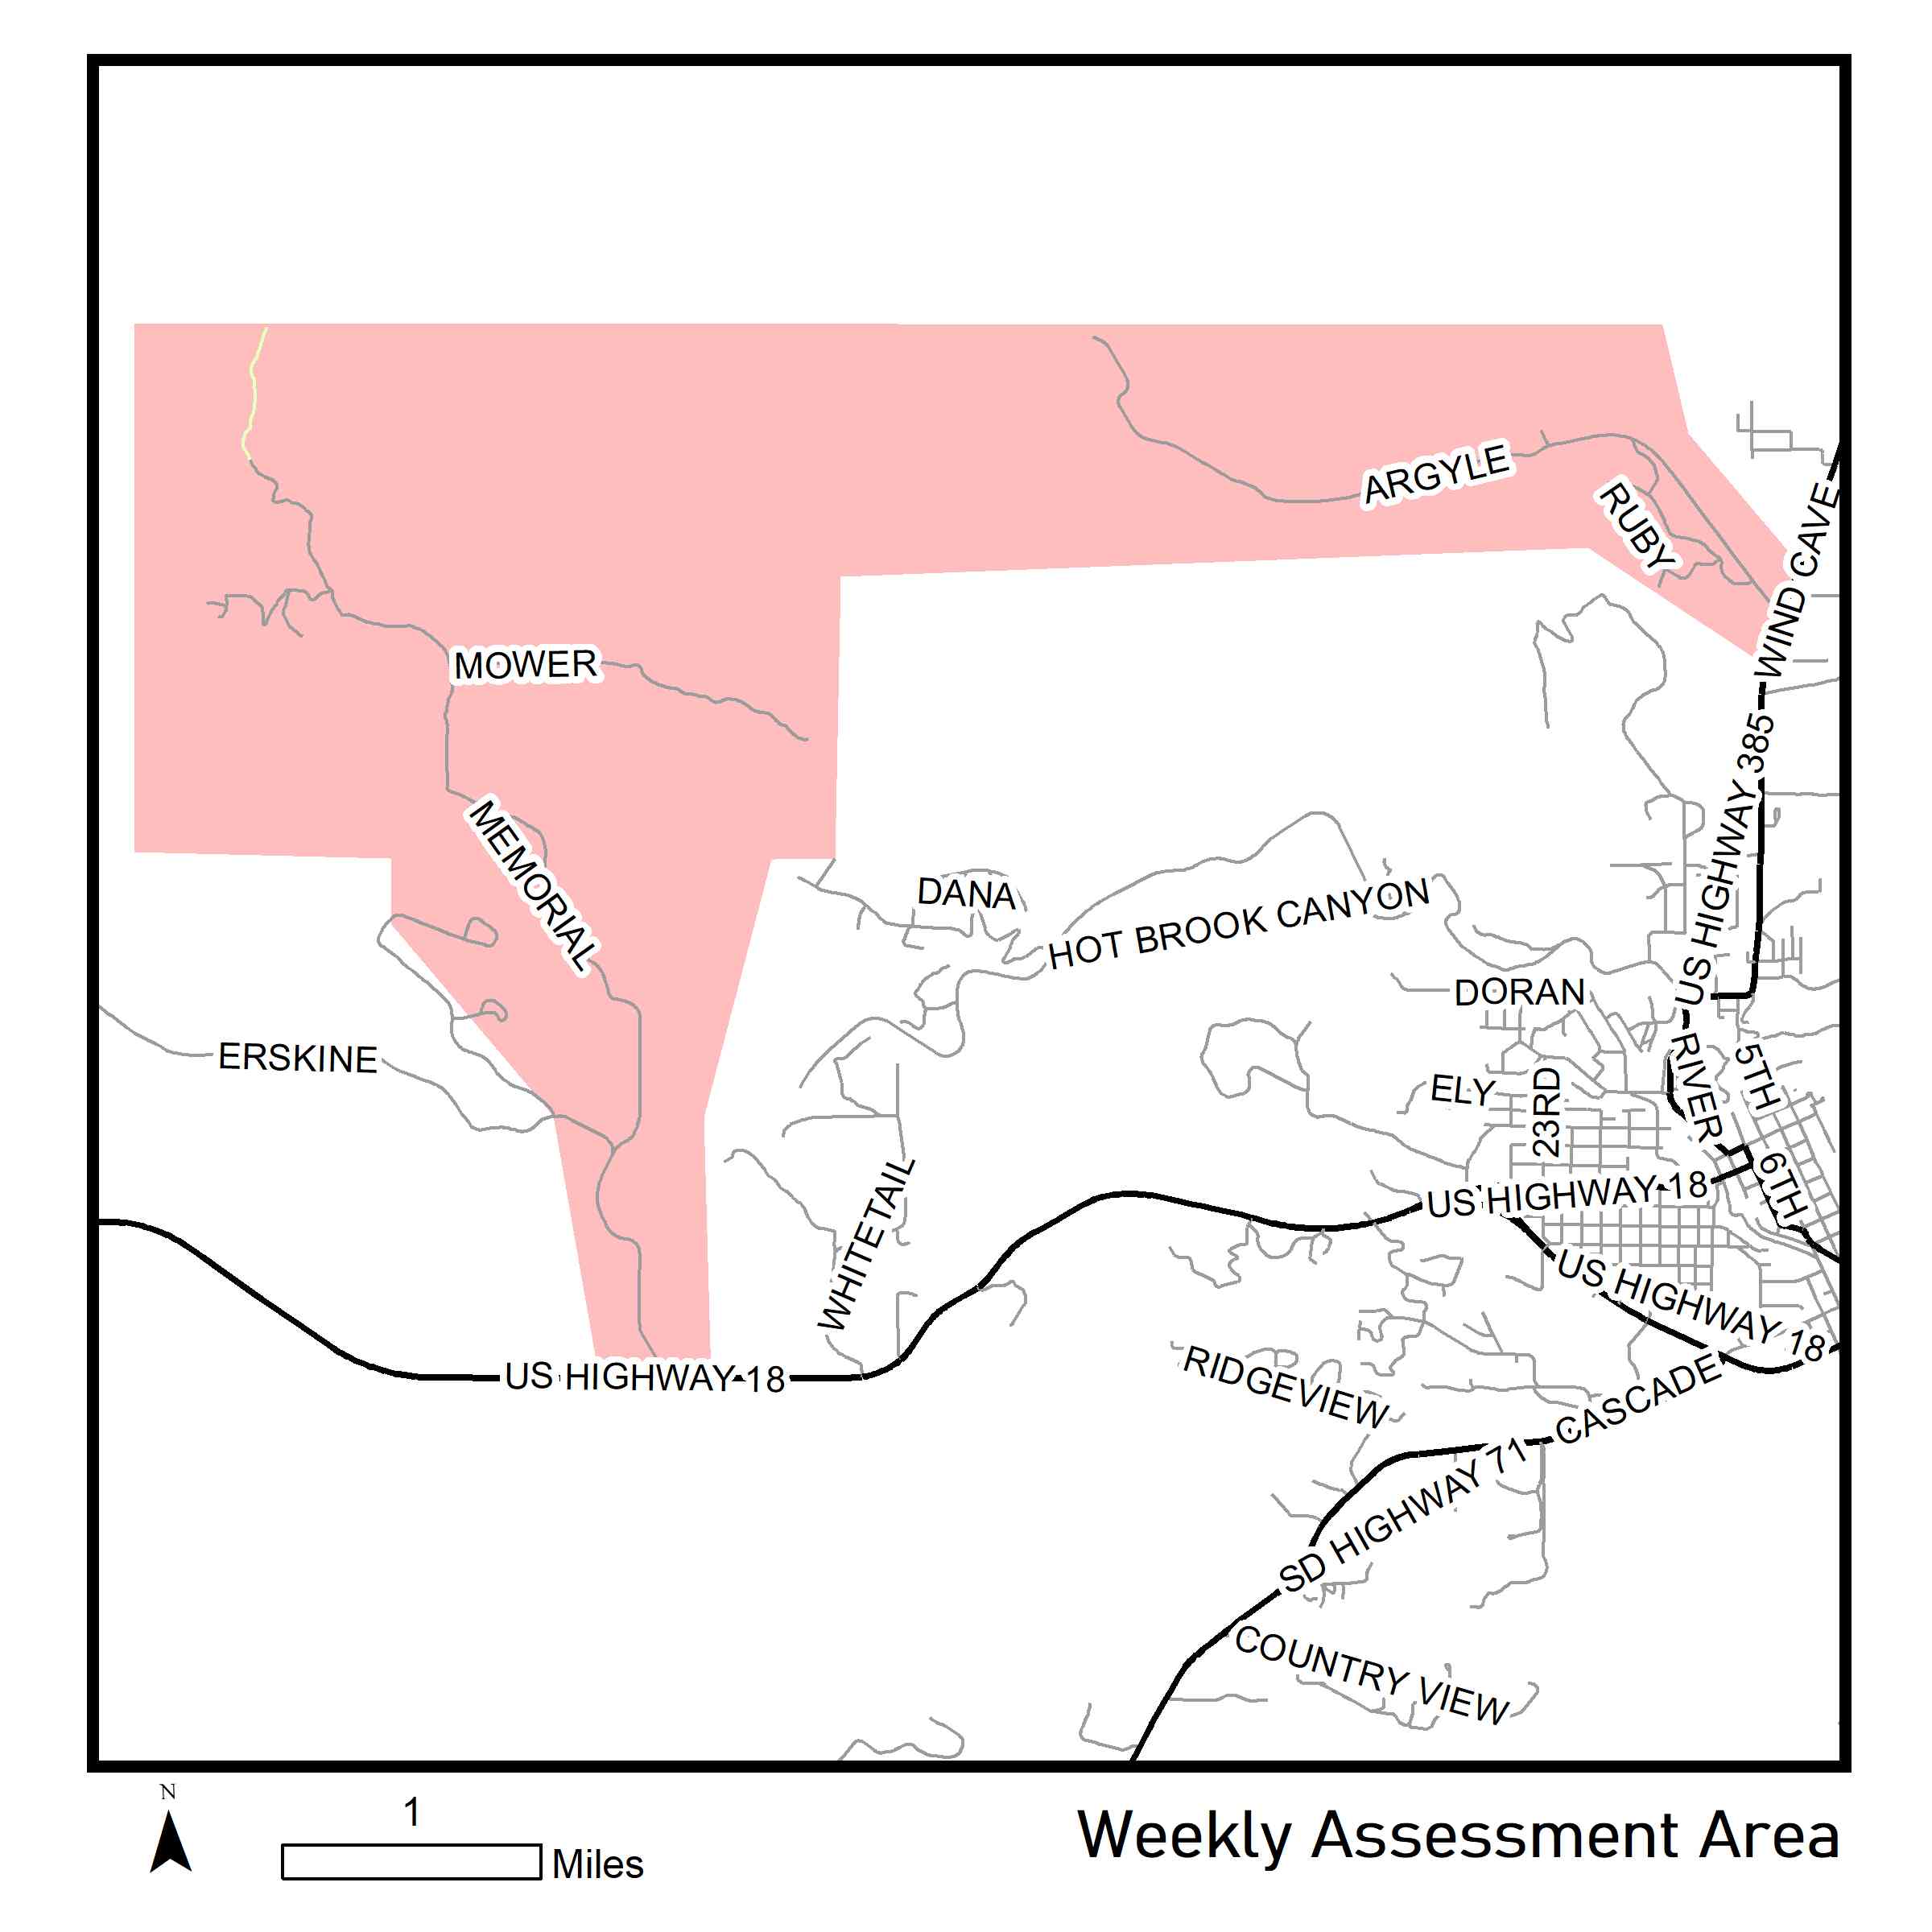 Map of reassessment area for week of August 31st 2020.